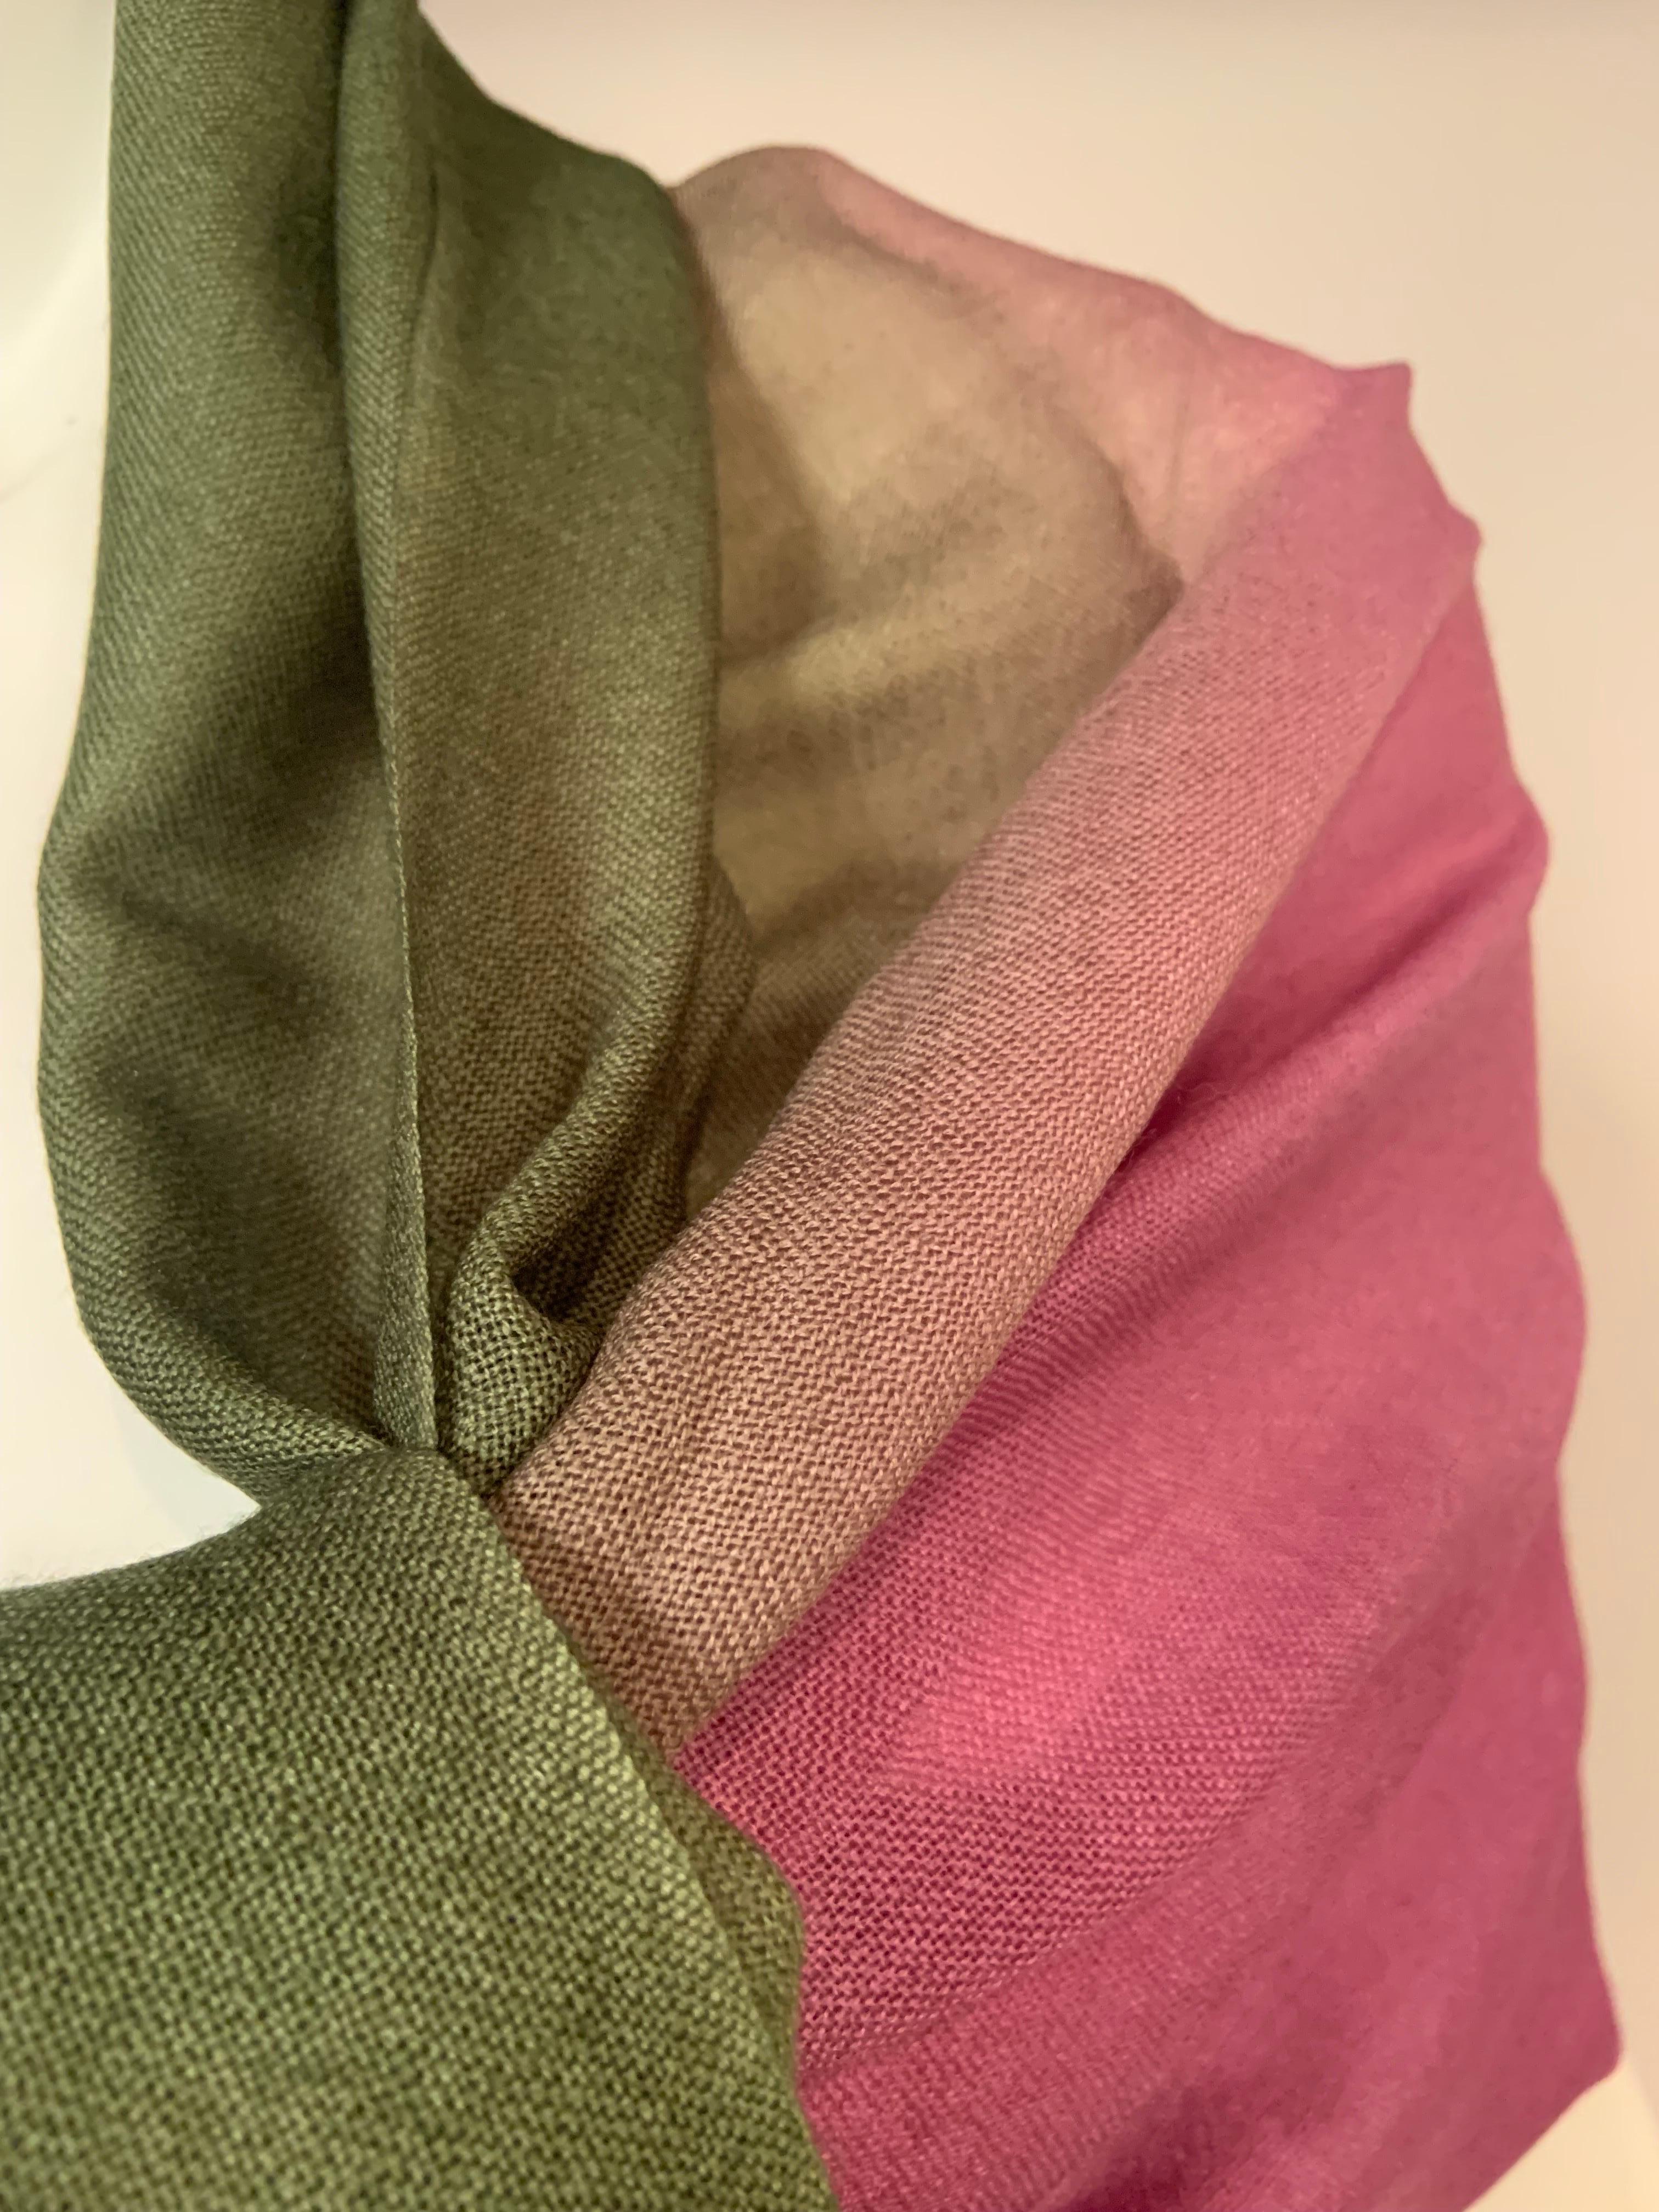 One side lavender, one side green and the most subtle ombre effect in the center. This is a very fine wool shawl or scarf from Basile. The colors melt into one another, it is that beautiful.  The shawl has never been worn and is in excellent